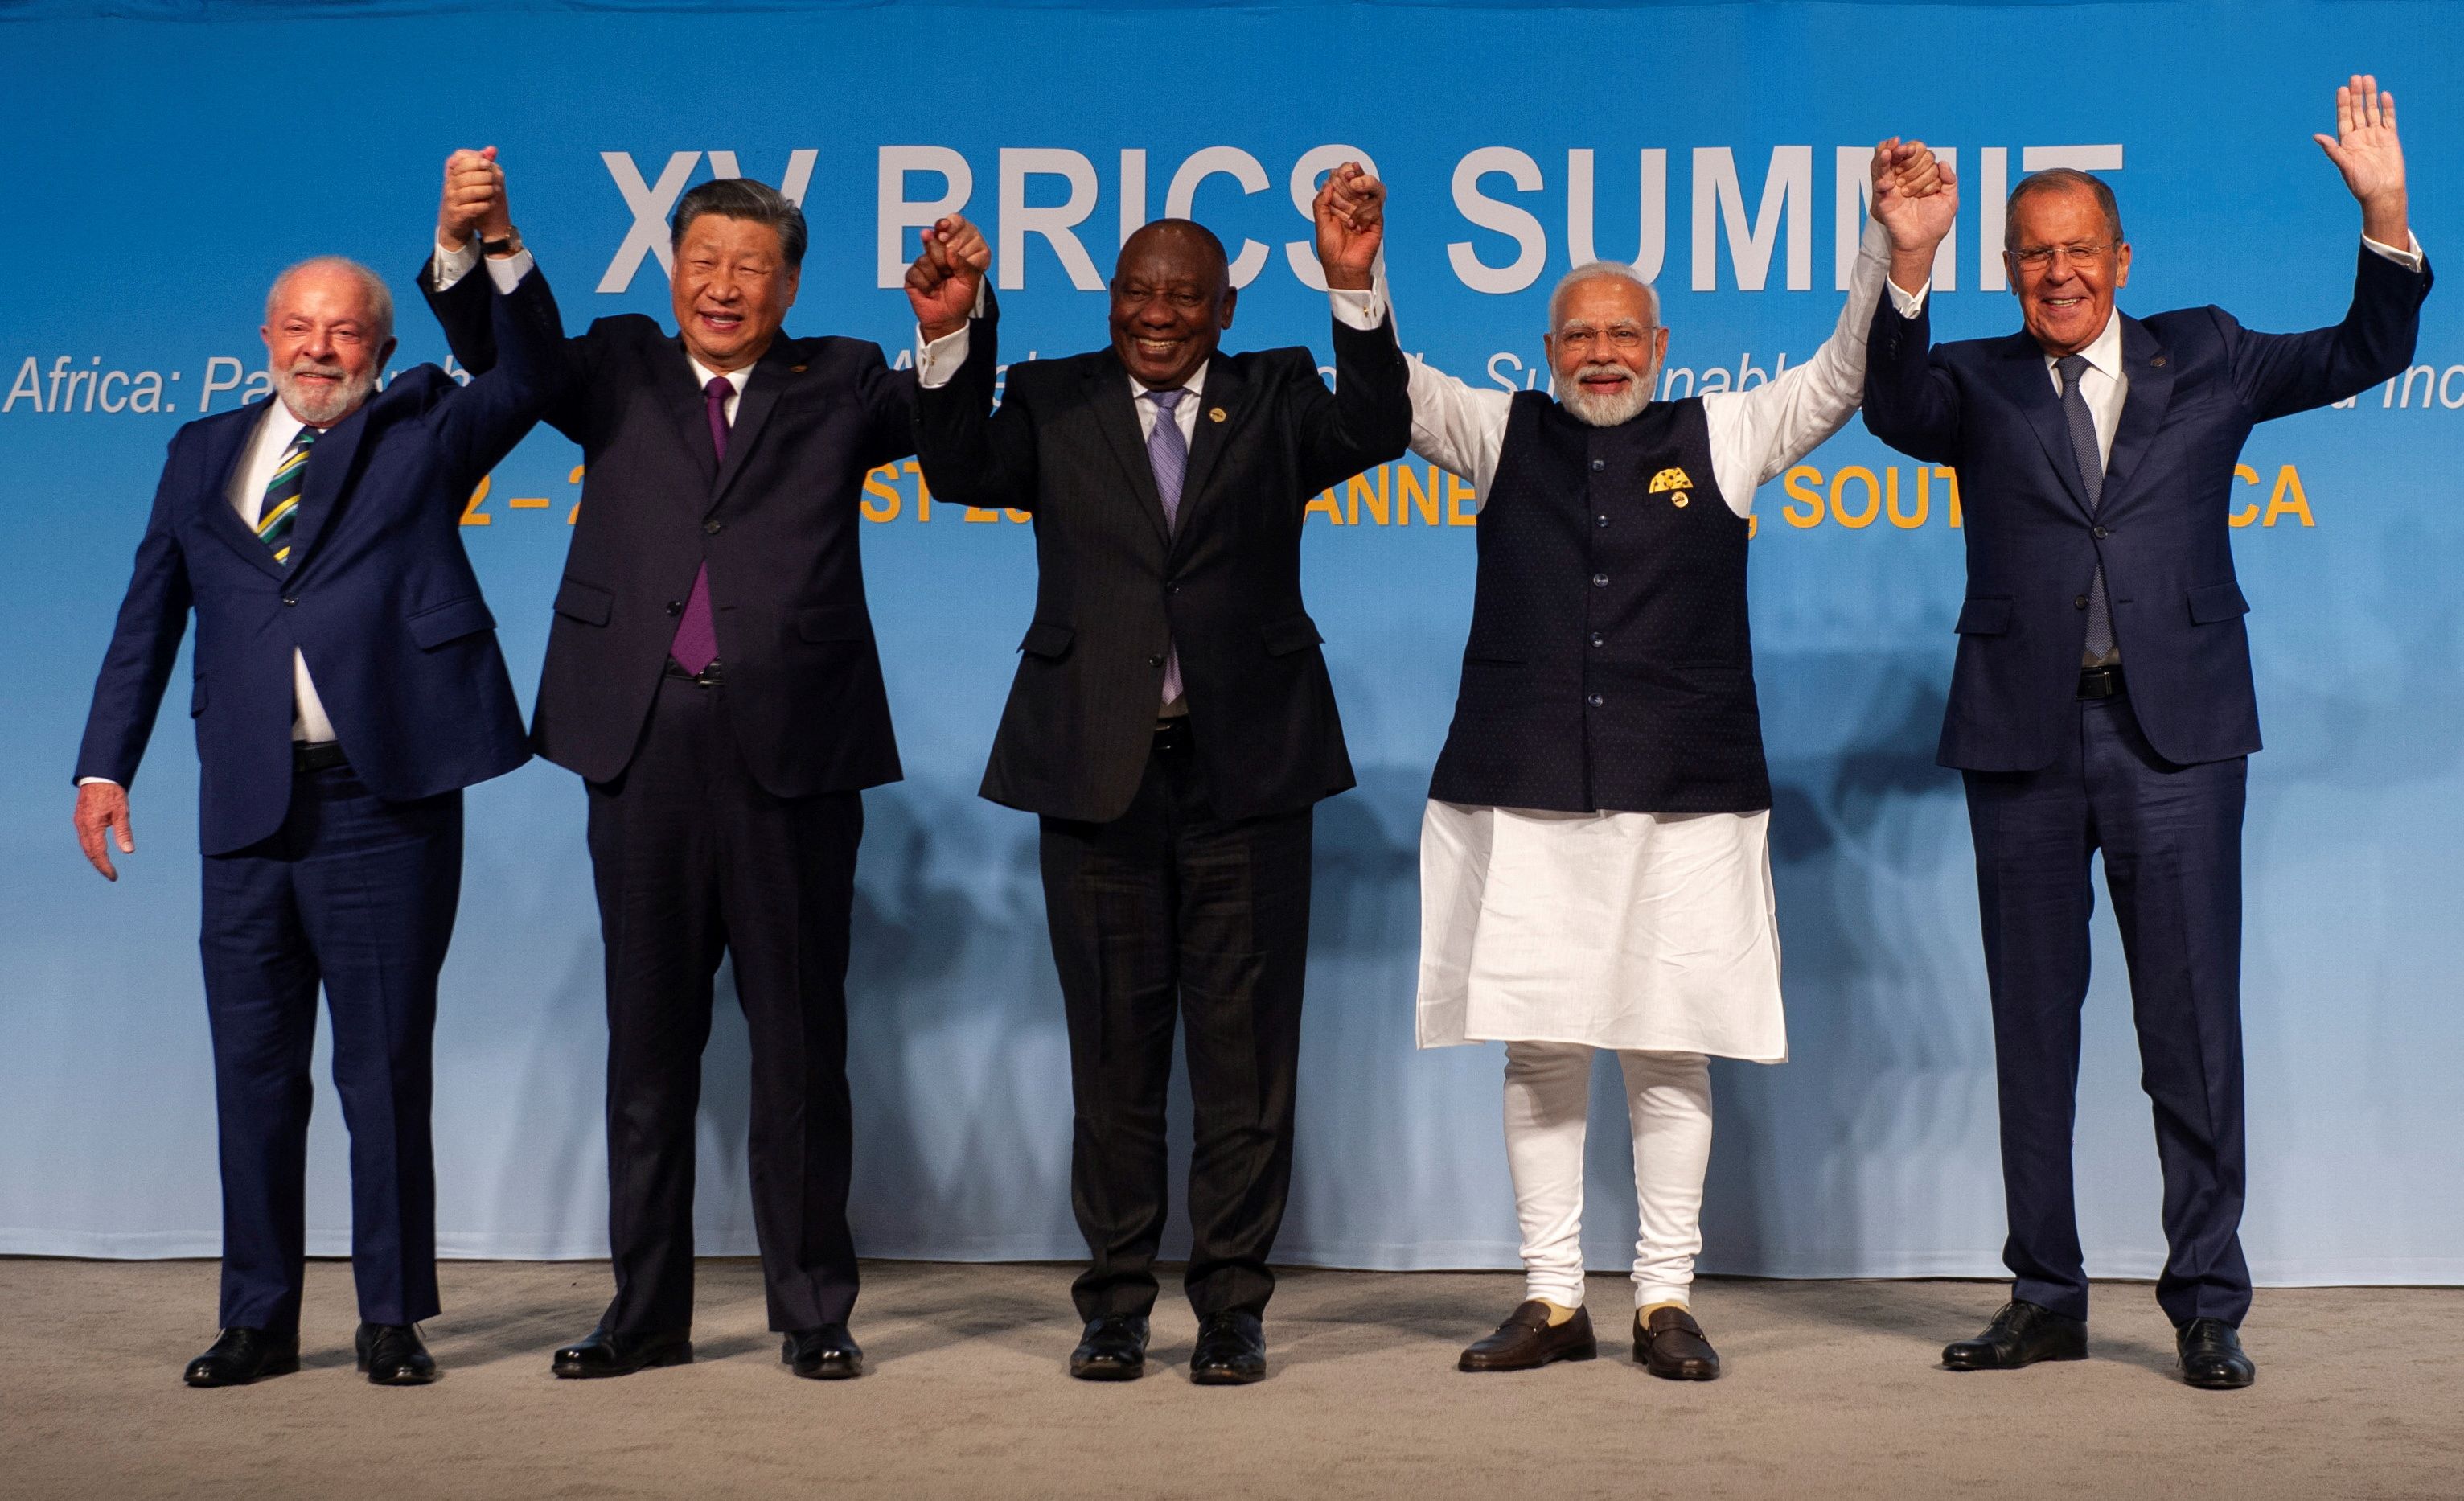 Brazil's President Luiz Inacio Lula da Silva, China's President Xi Jinping, South African President Cyril Ramaphosa, Indian Prime Minister Narendra Modi and Russia's Foreign Minister Sergei Lavrov pose for a picture standing up holding hands above their heads at the BRICS Summit in Johannesburg, South Africa on August 23, 2023. 